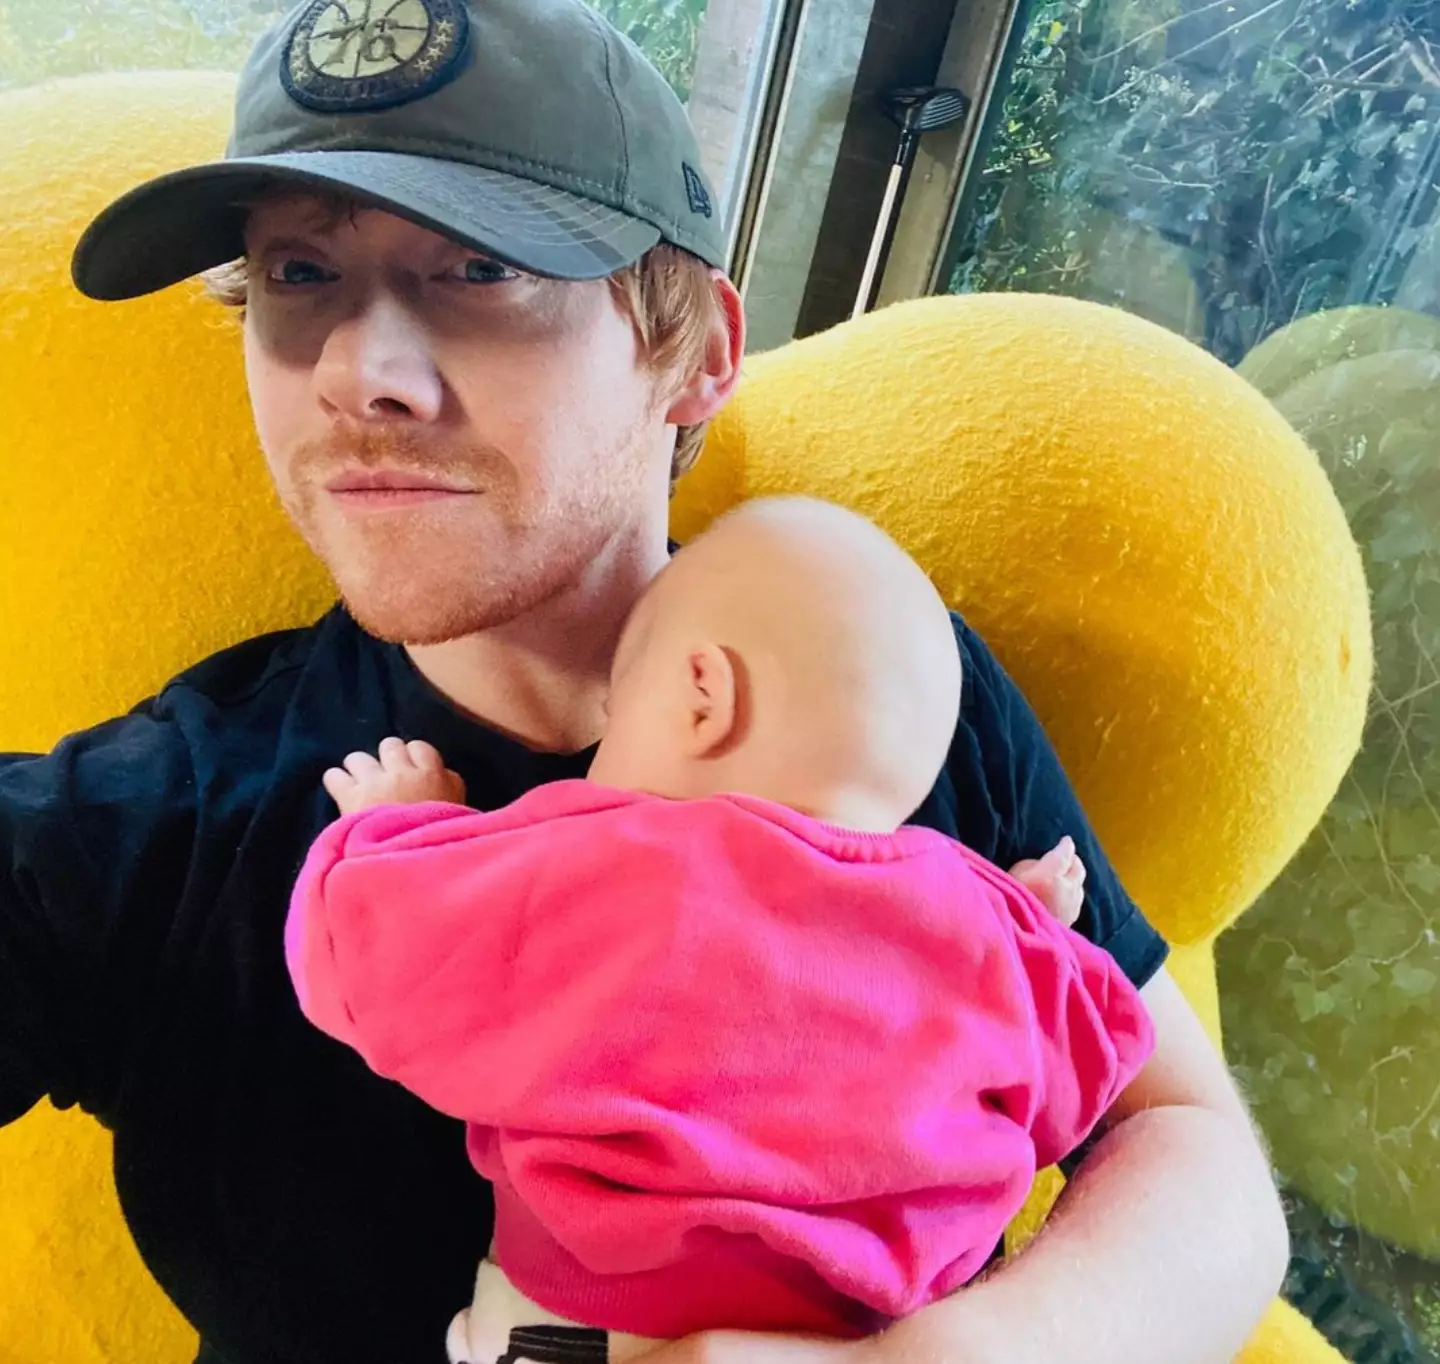 Rupert Grint and his partner, Georgia Groome, keep their daughter out of the public eye as much as possible.